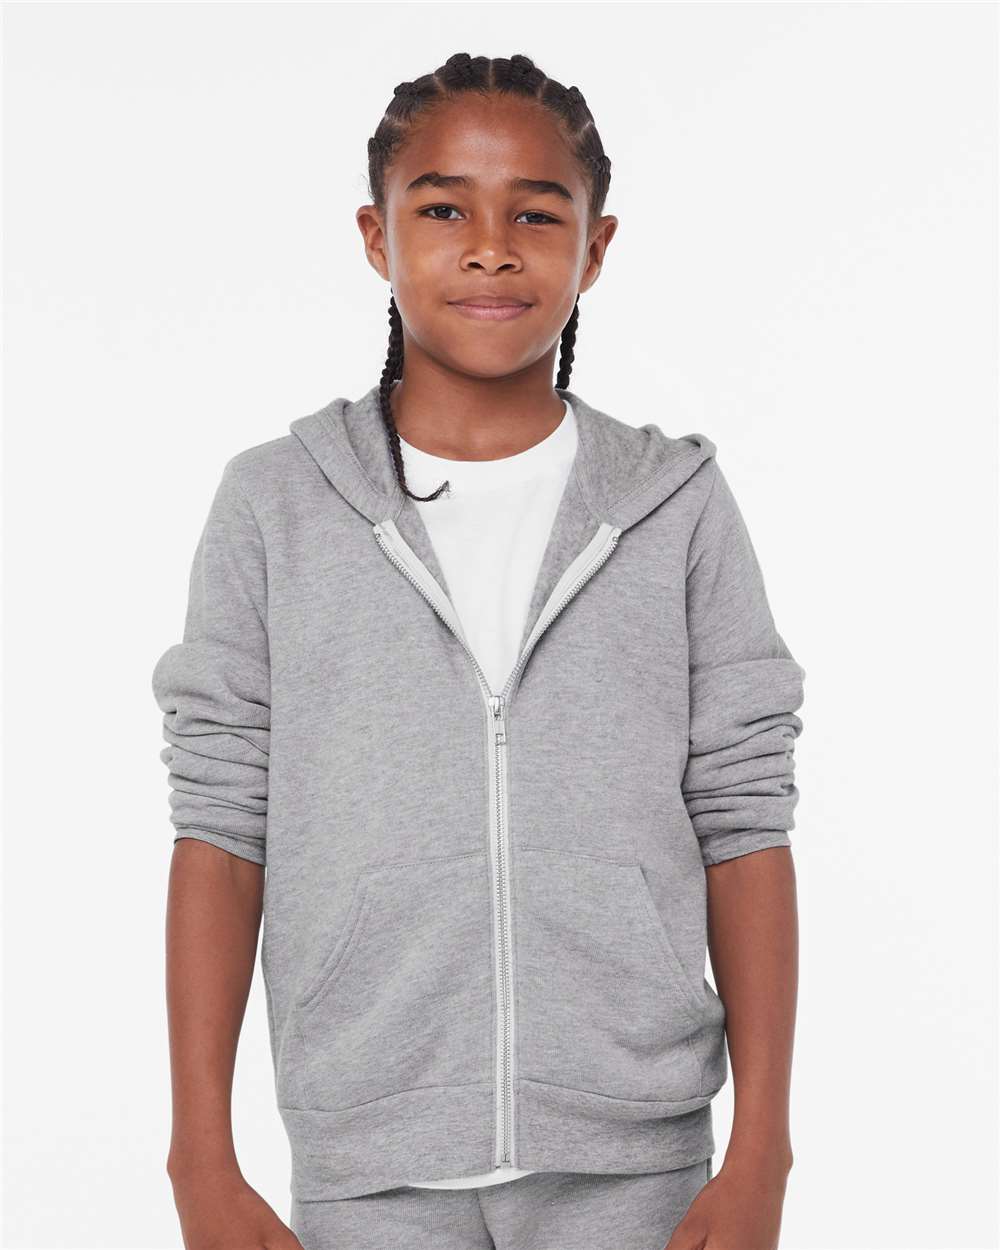 Bella + Canvas - Youth Sponge Fleece Full-Zip Hoodie Luxurious 8 Oz./yd²,  52/48 Airlume Combed and Ring-Spun Cotton/polyester Fleece